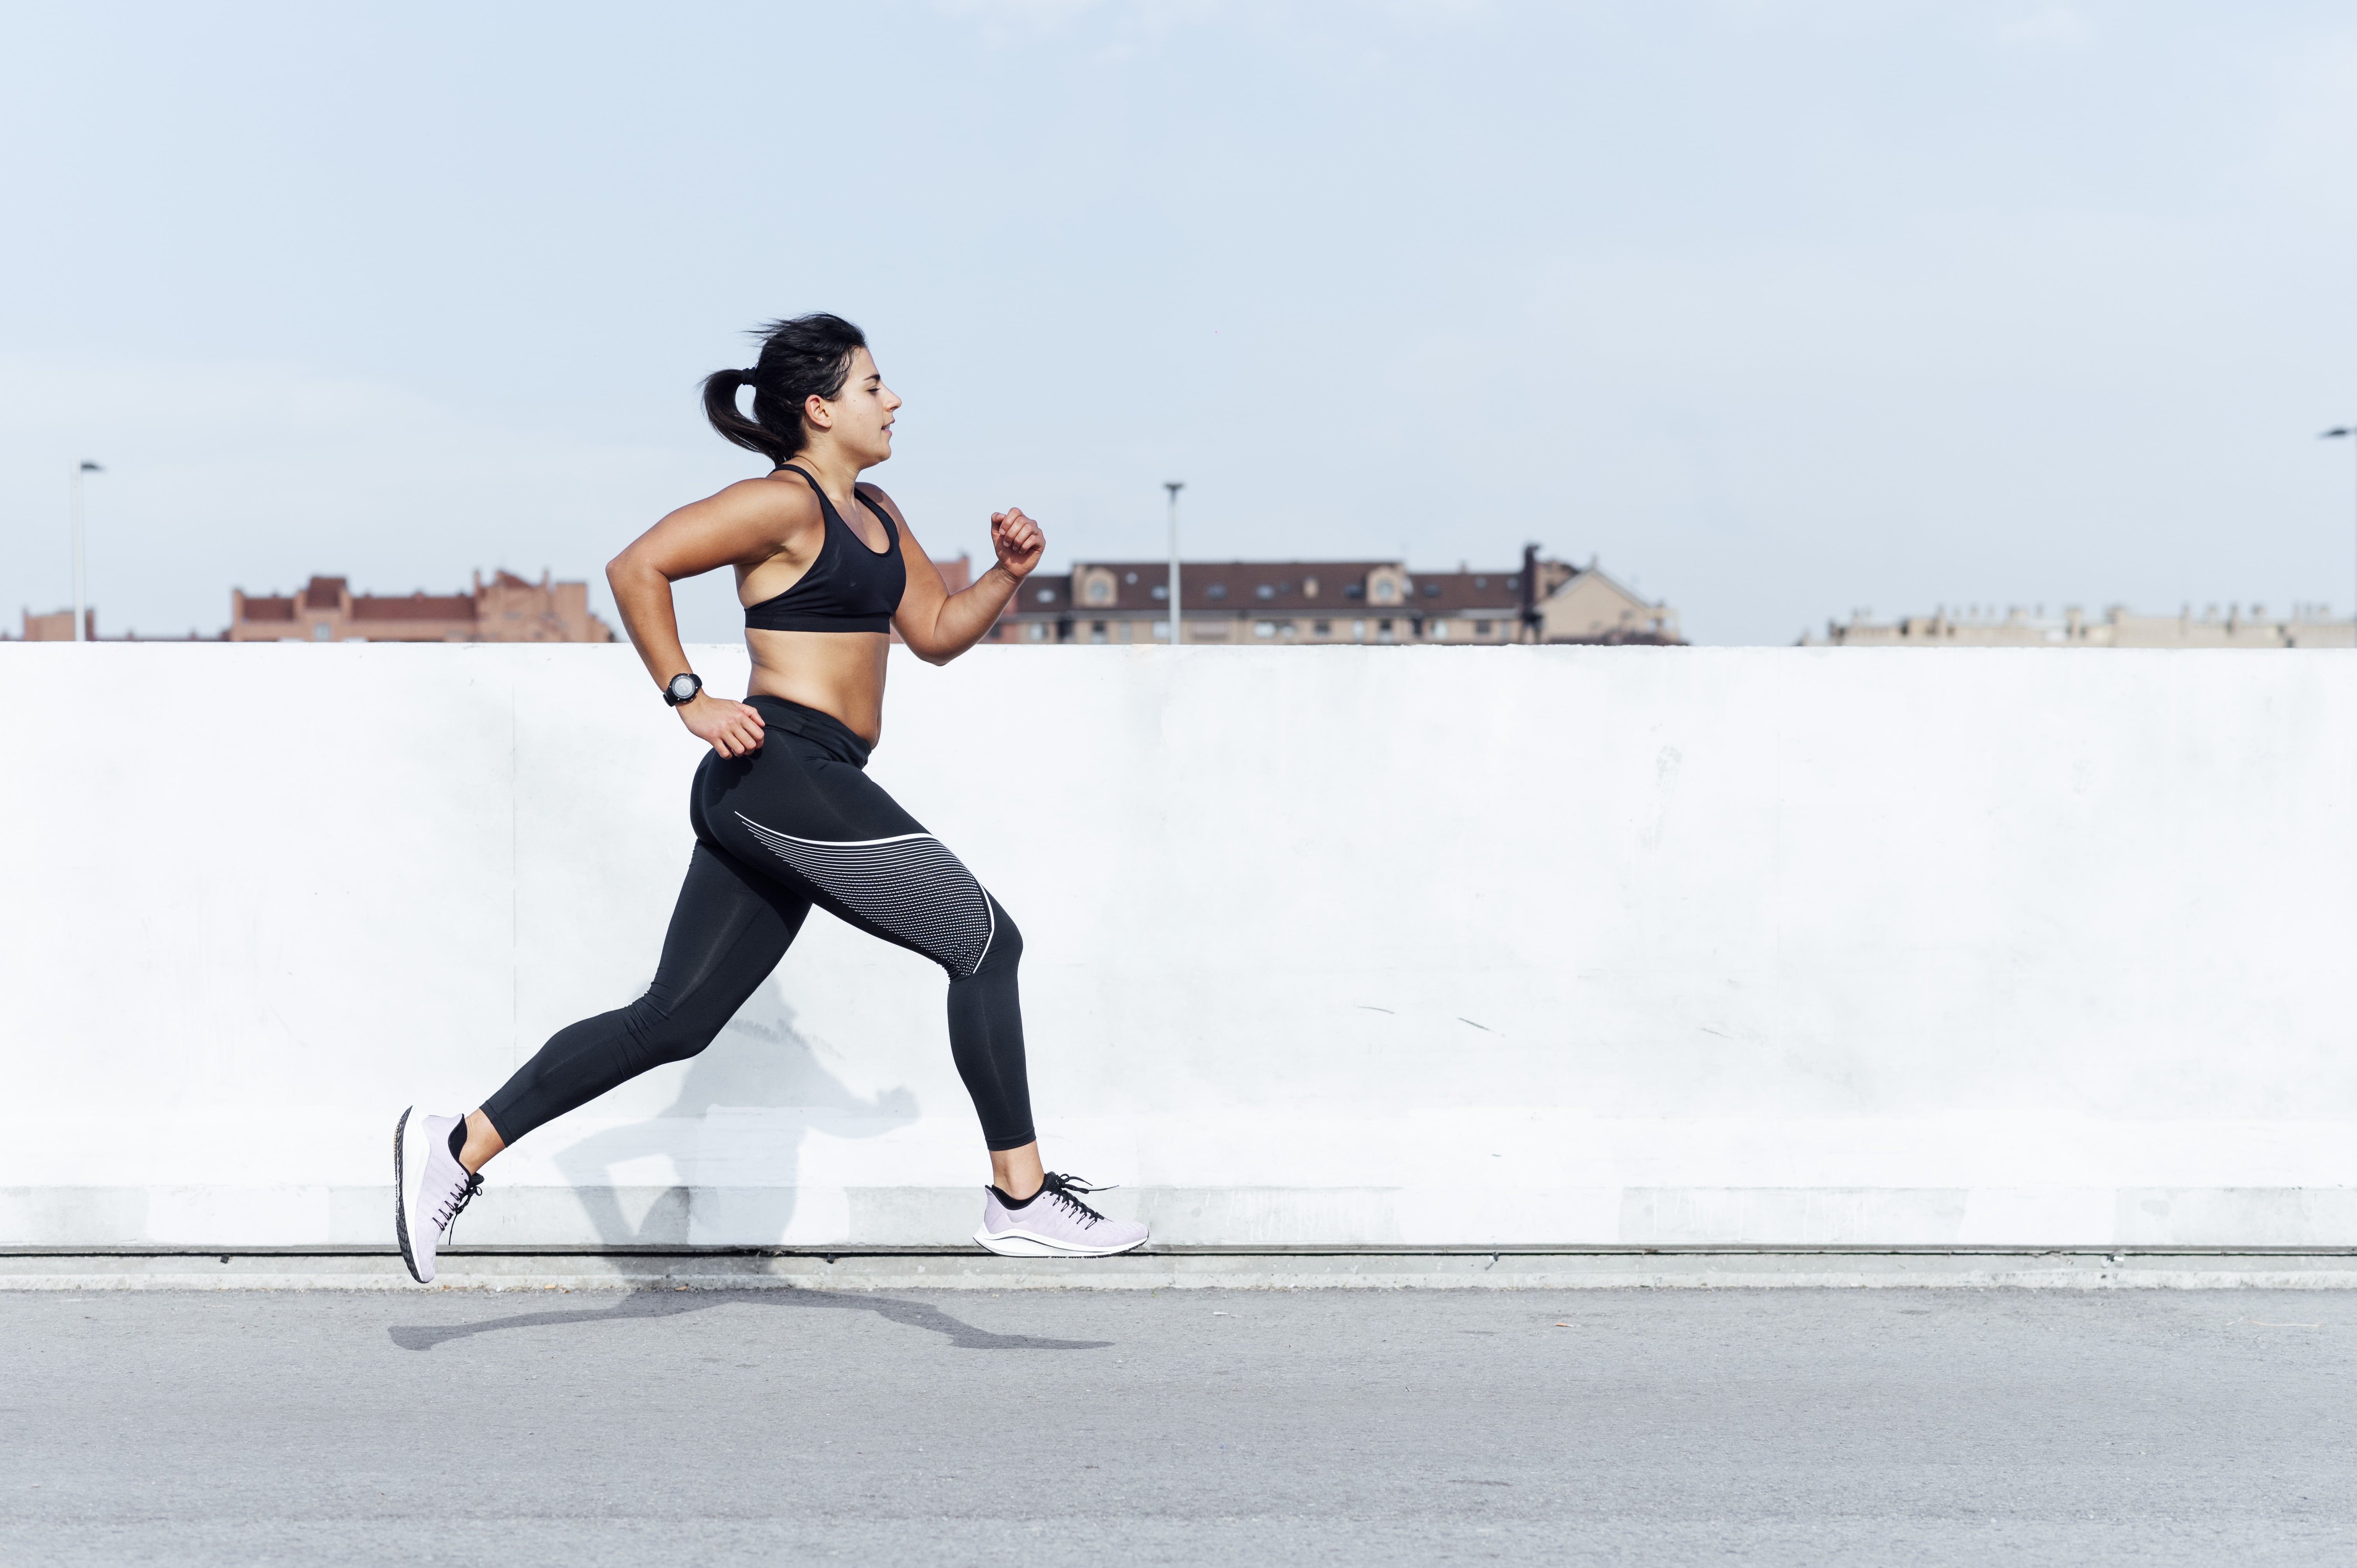 The Beginner's Guide to Sprint Interval Training